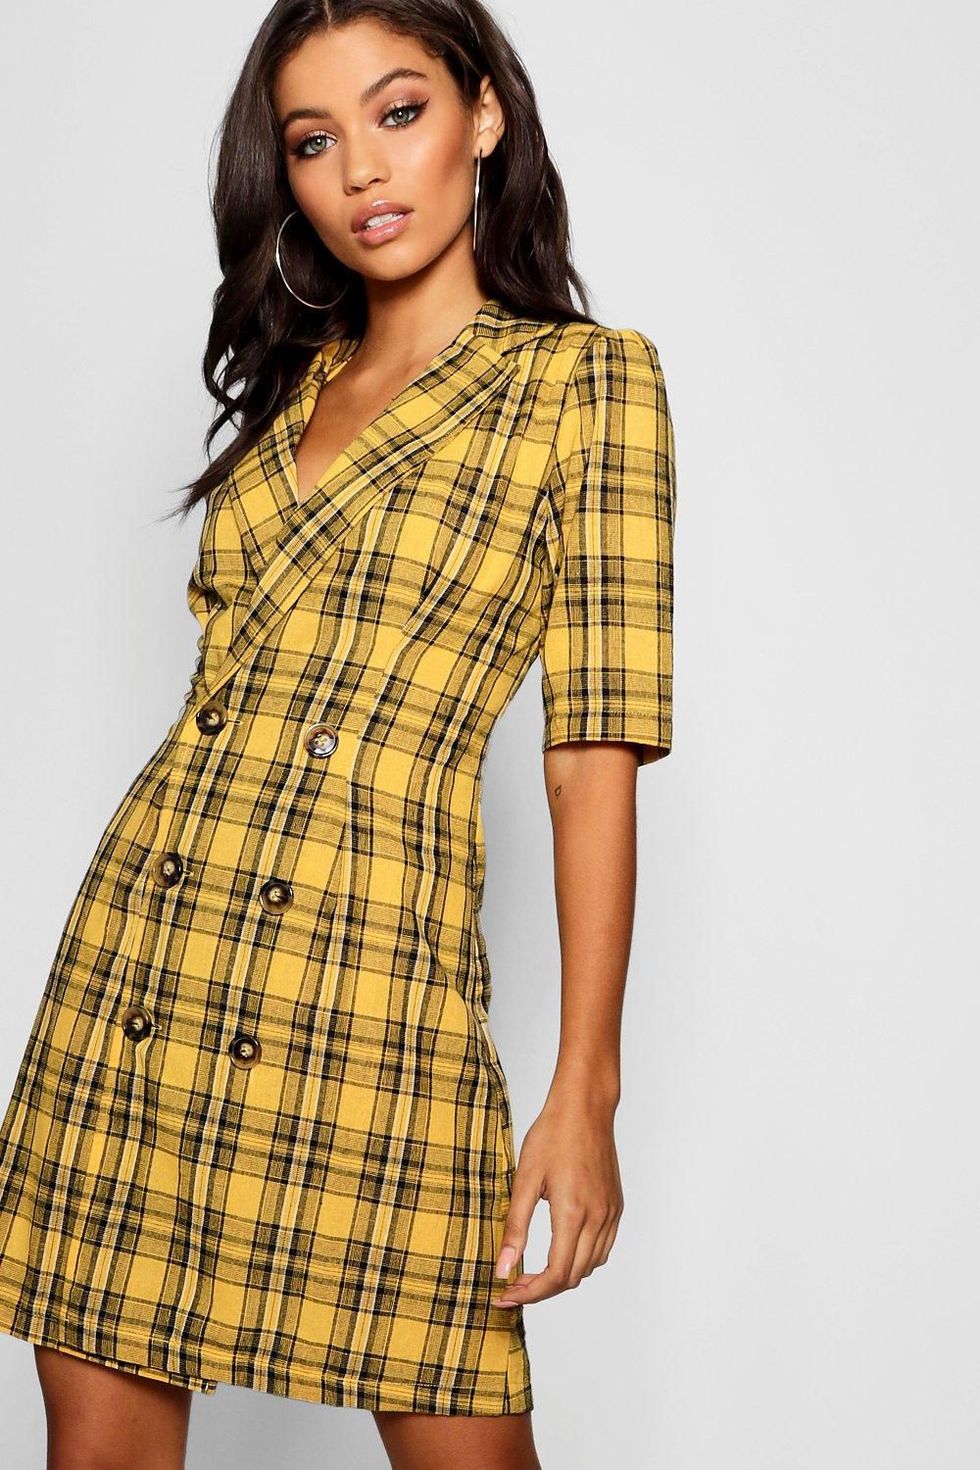 Plus Size Clueless Vibes from Boohoo